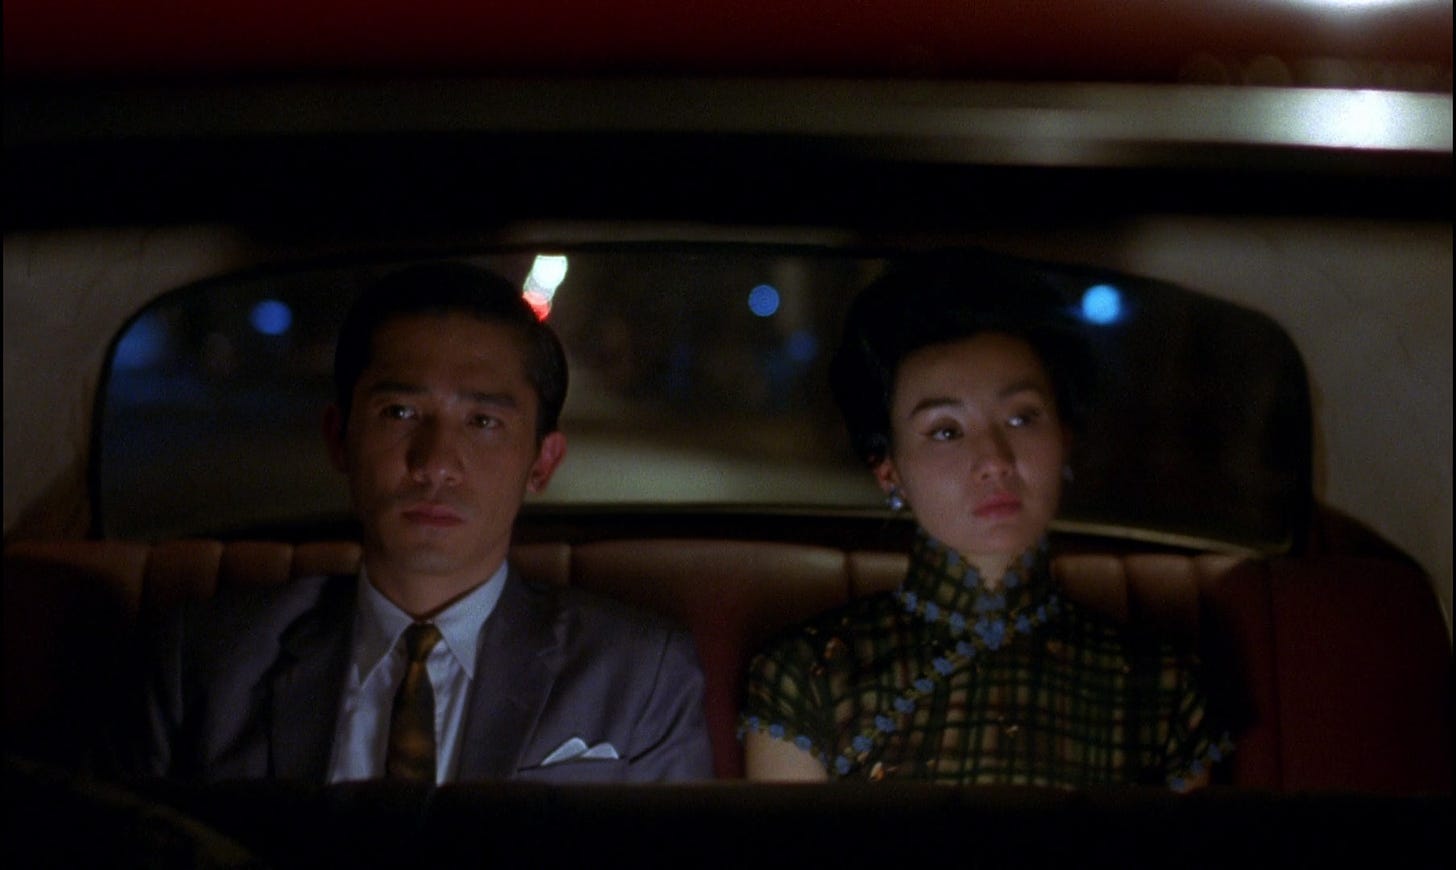 A man and a woman sit side by side in the back seat of a car, not looking at each other. It is night.